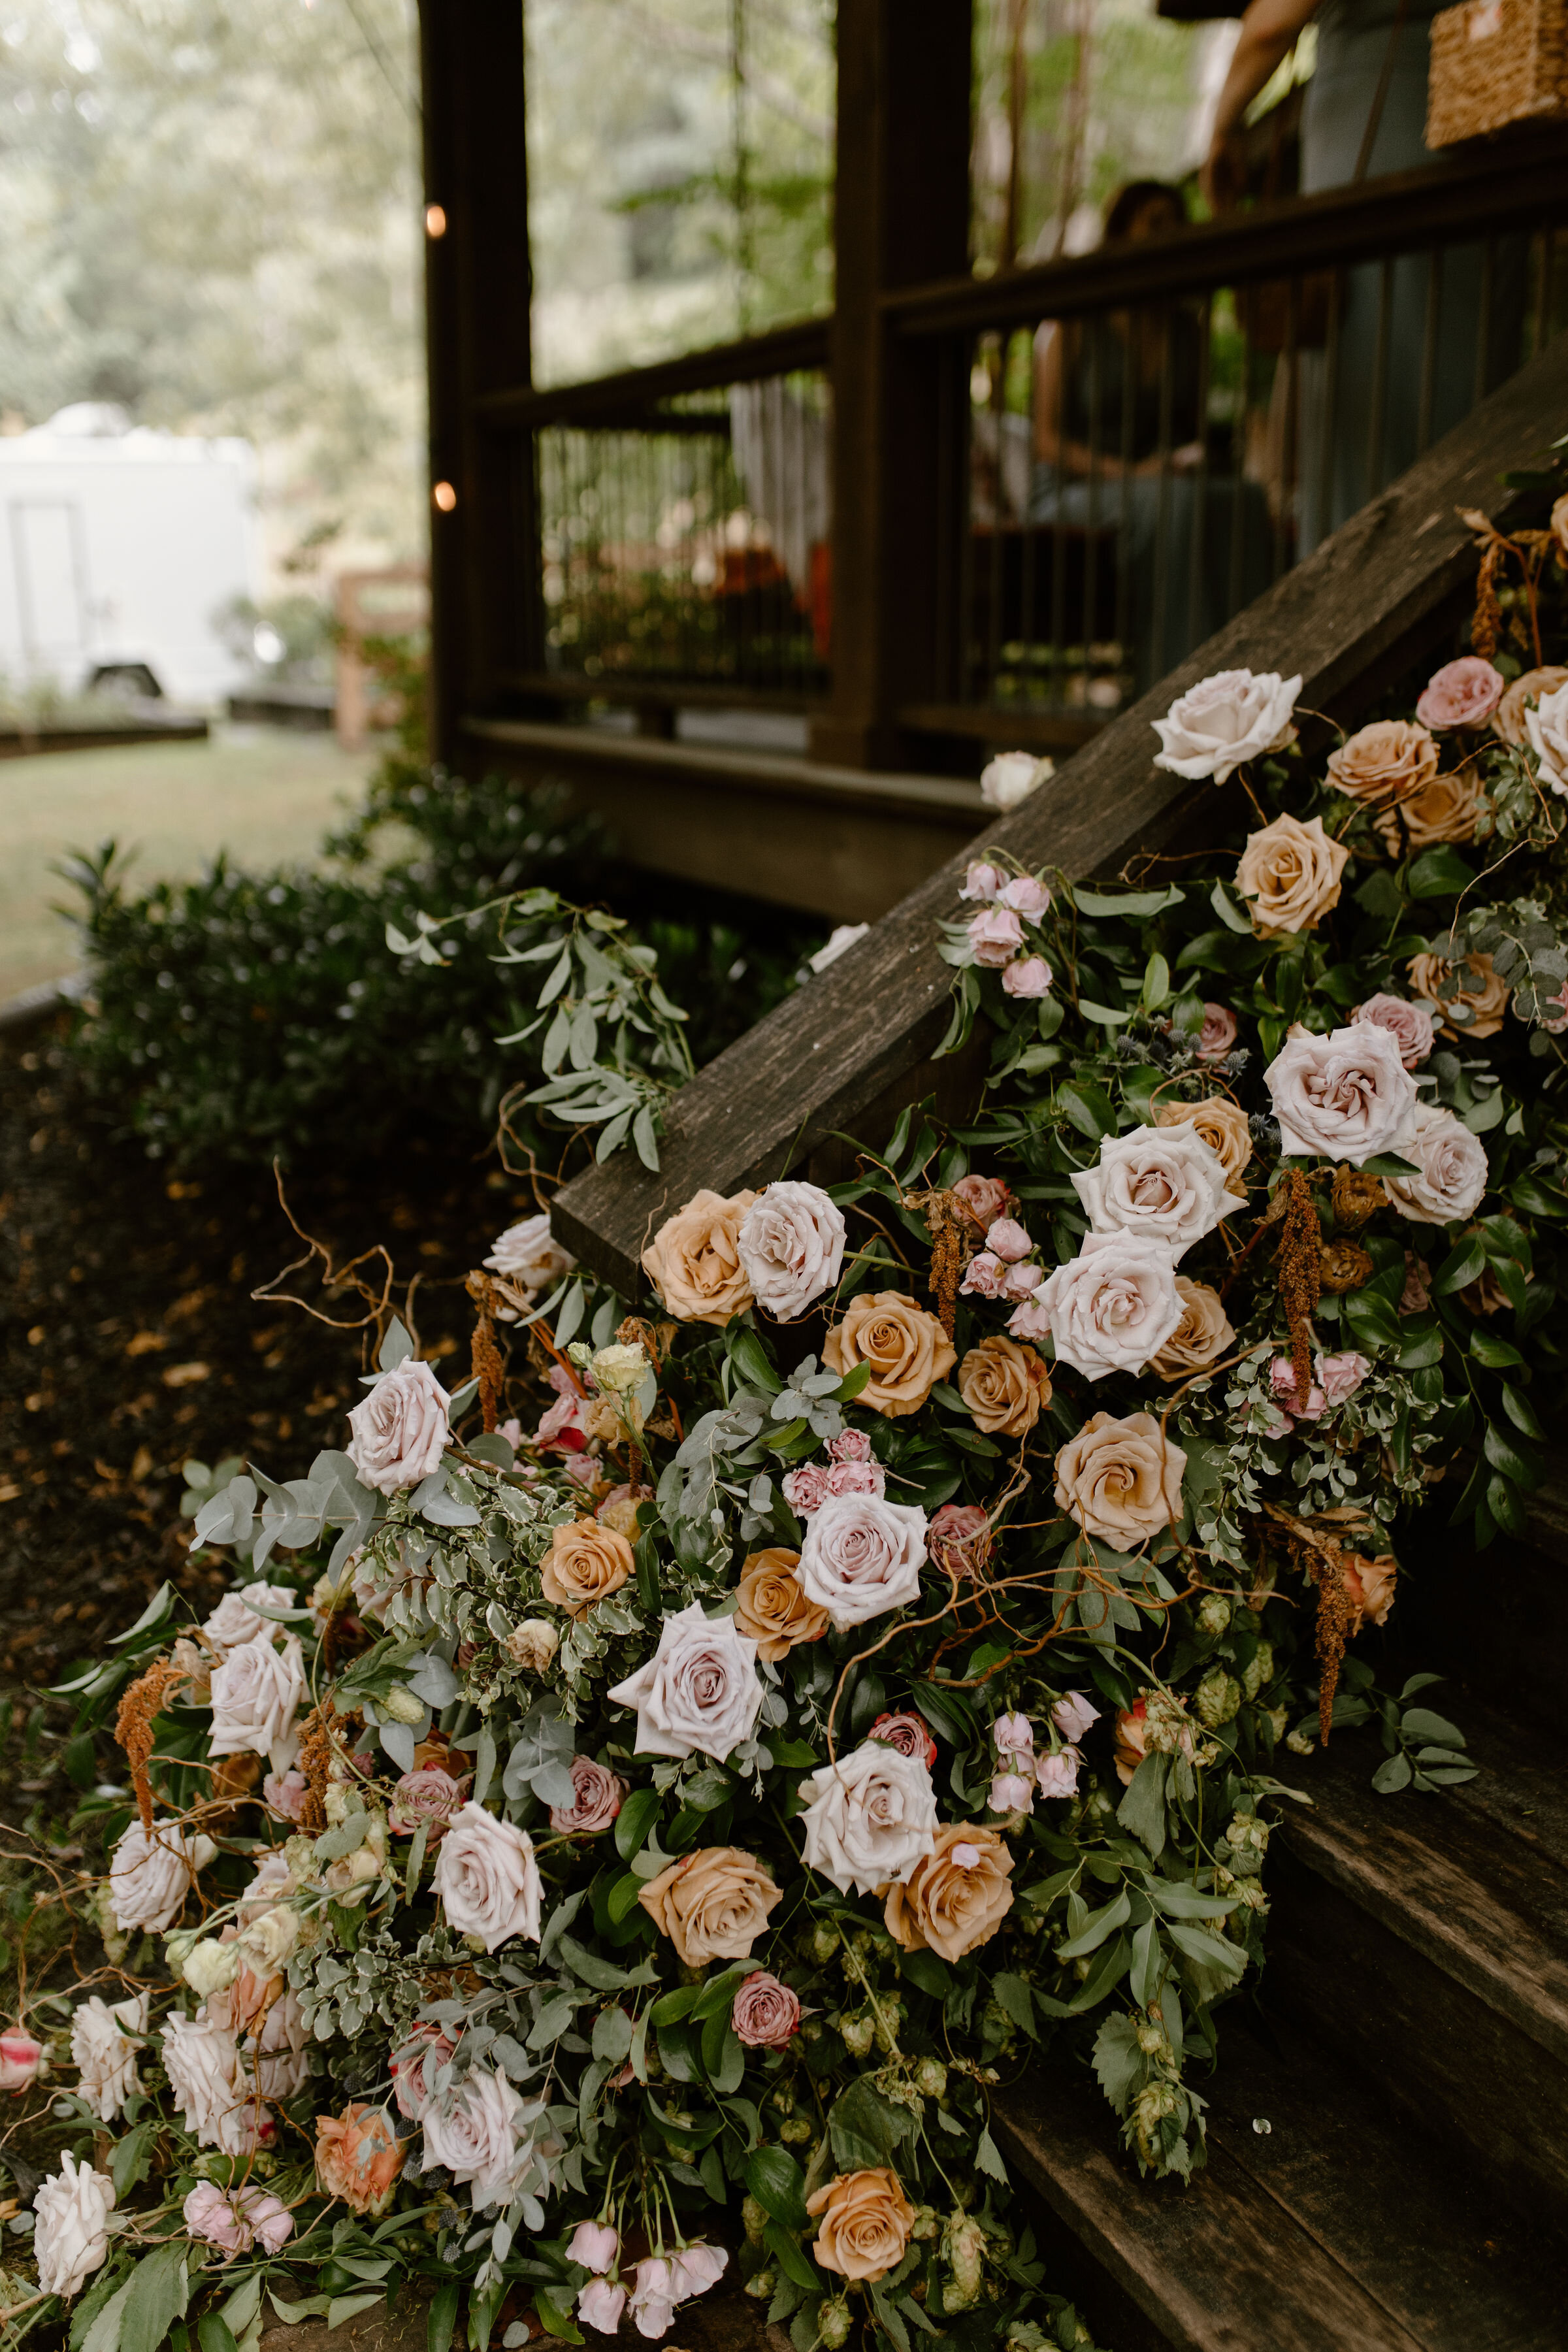 Intimate Blush and Toffee Garden Wedding in Nashville. Floral design by Rosemary and Finch.